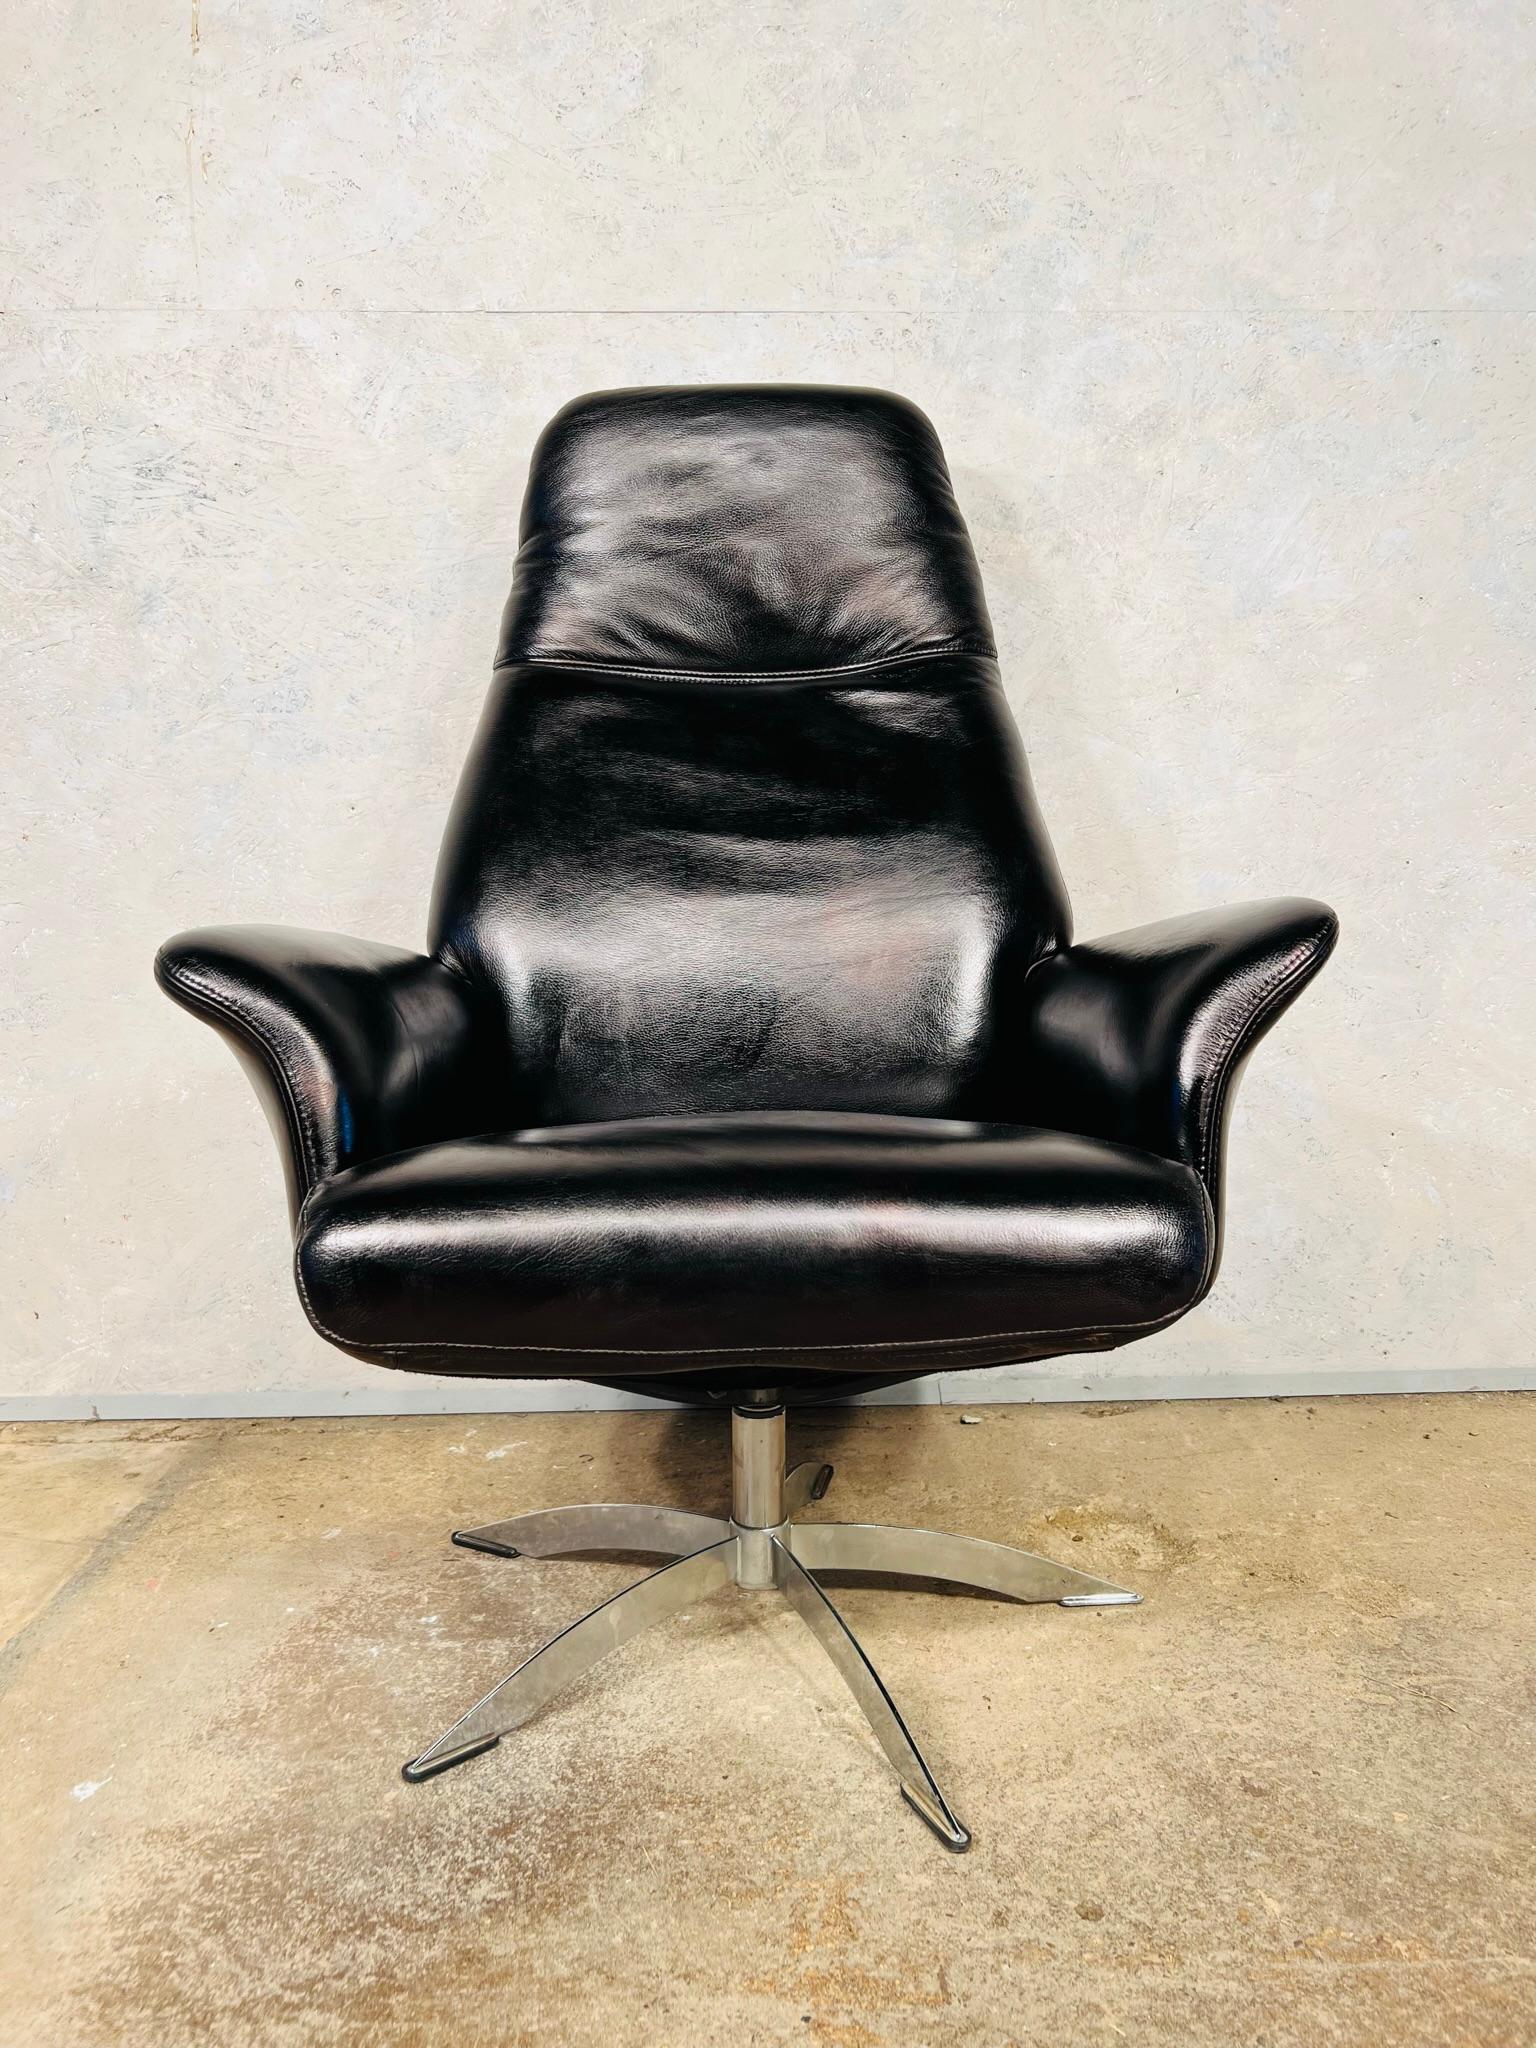 Superb Danish Leather Swivel Chair by Hjort Knudsen

A great design and very comfortable to sit in, made with great quality Leather, resting on a chrome swivel base, in excellent condition.

Viewings welcome at our showroom in Lewes, East